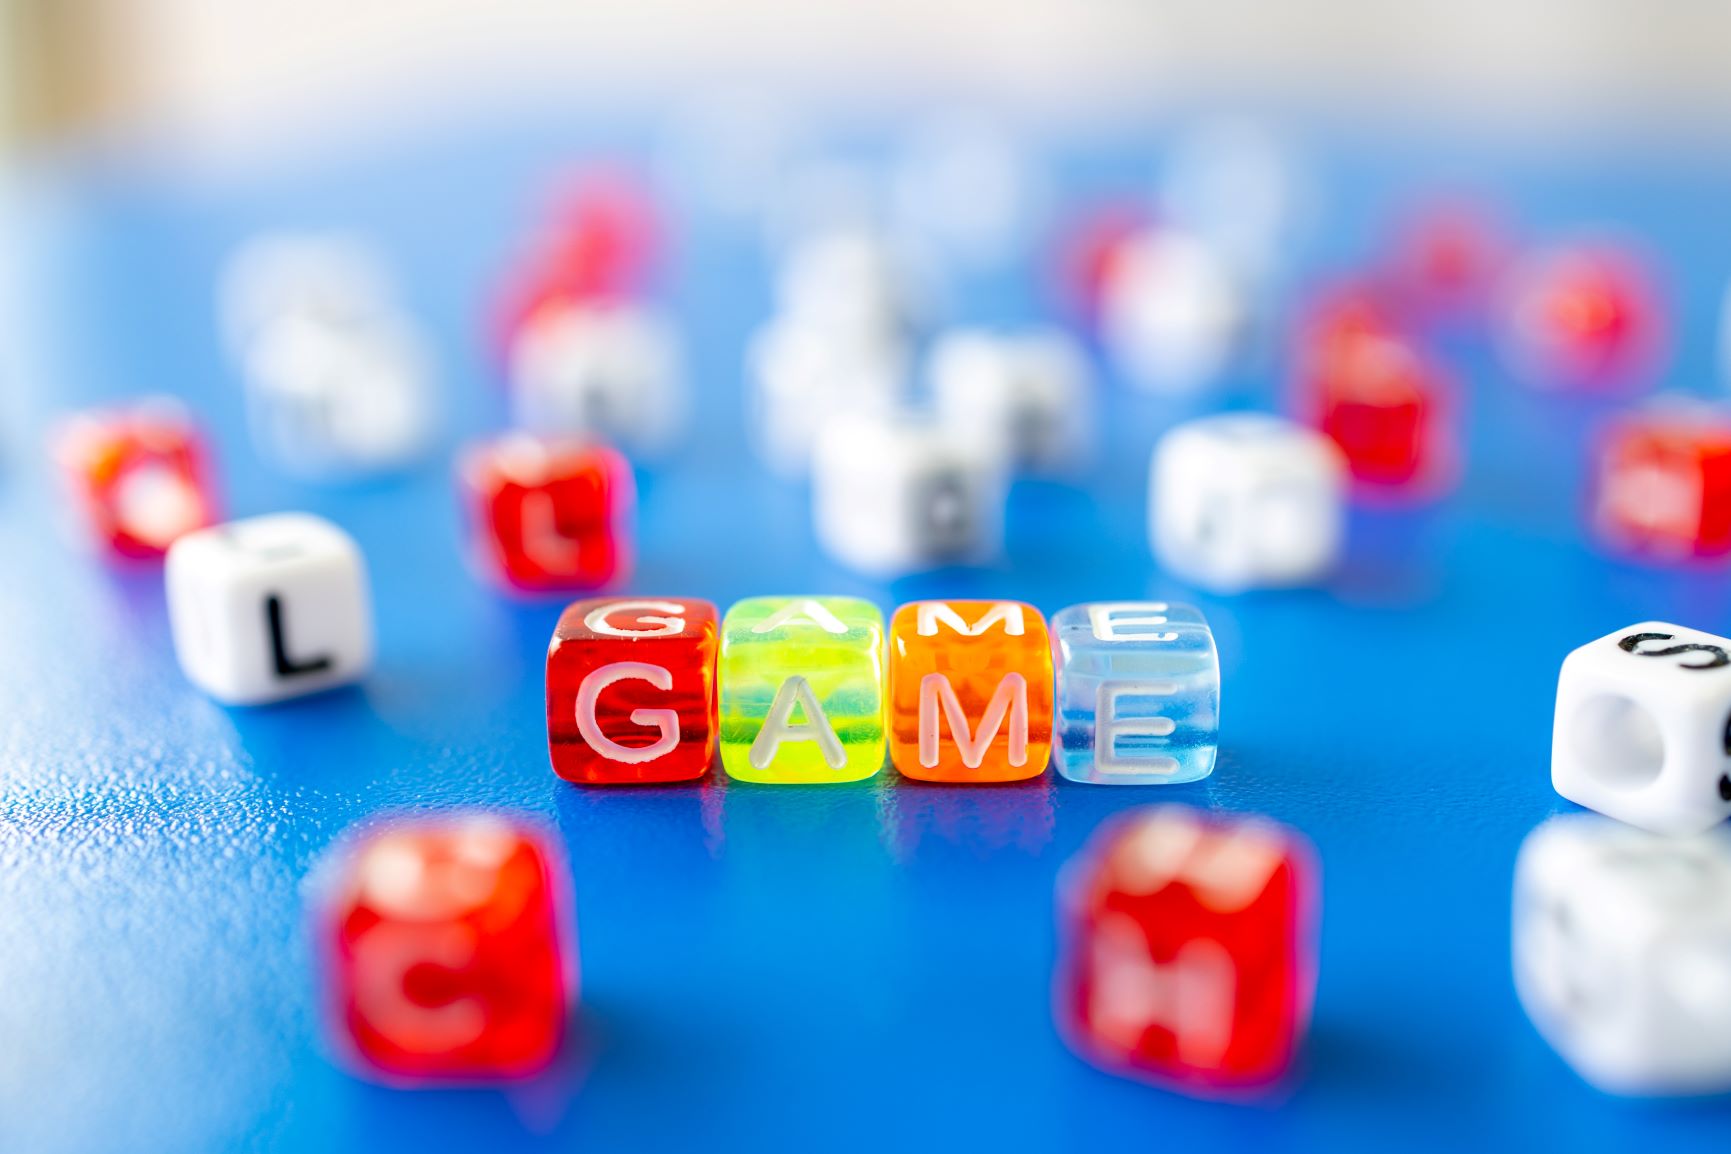 colourful beads spelling out "game"